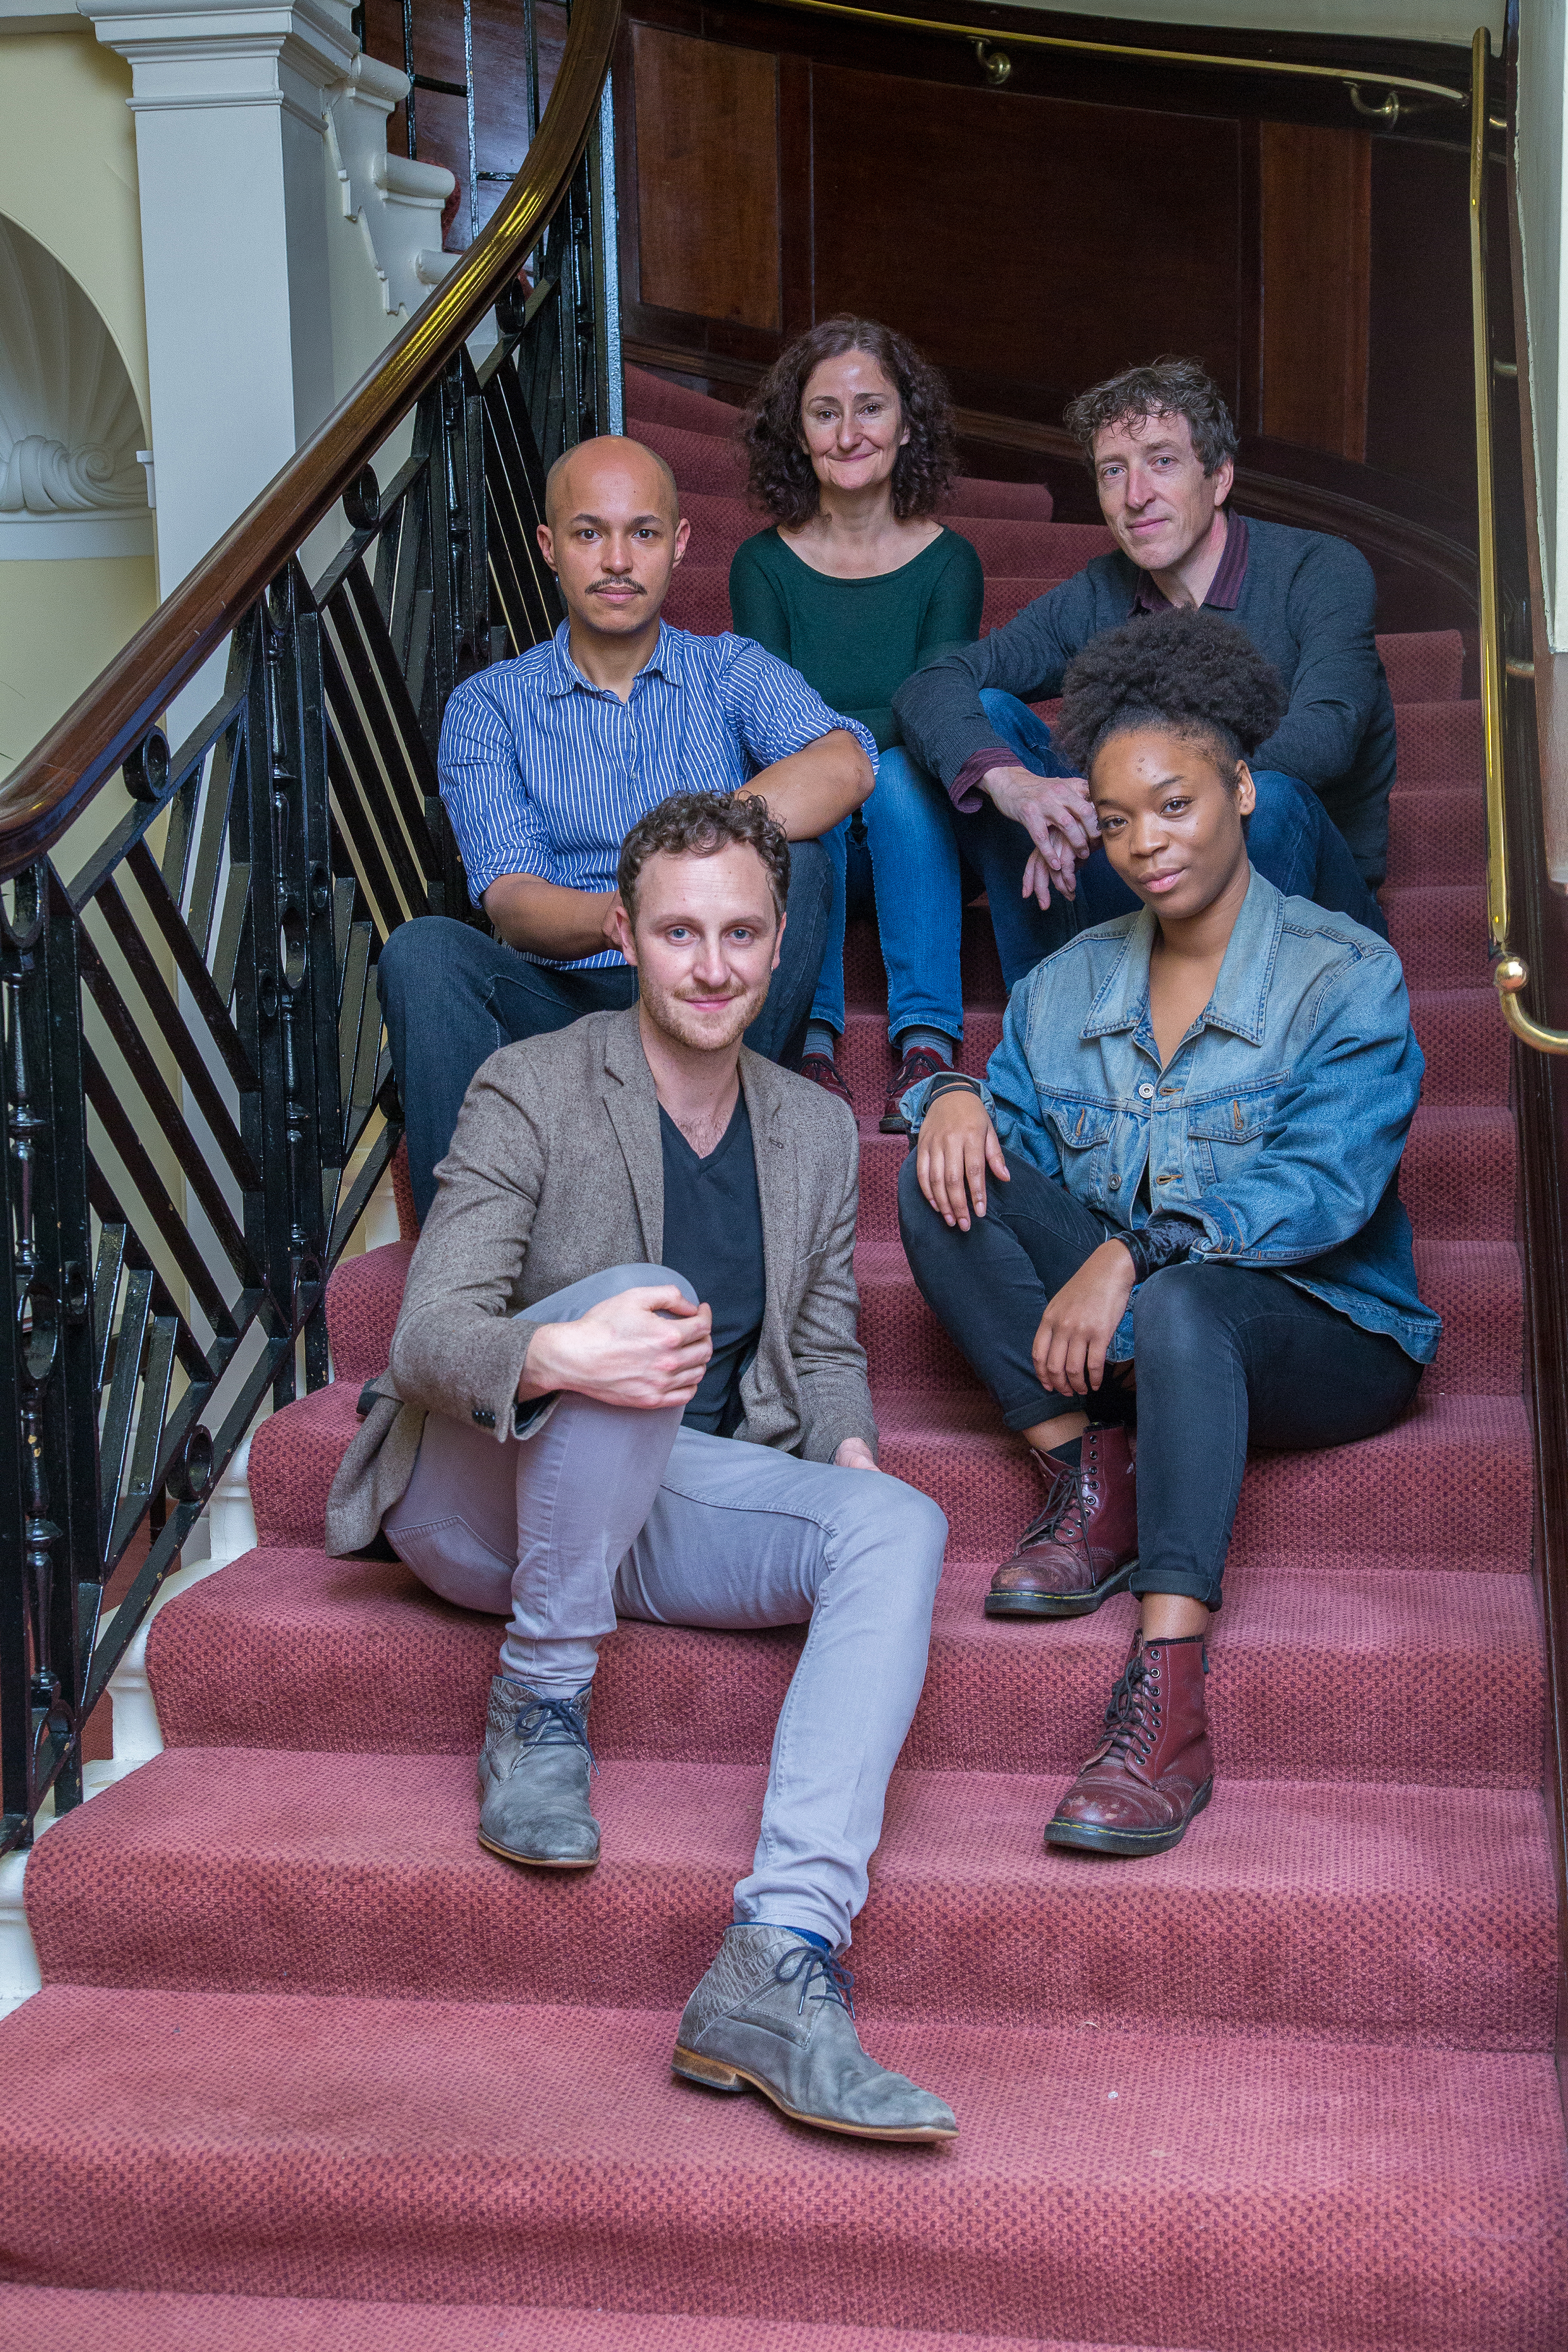 PHOTO: The troupe of actors, (from top, clockwise) Sarah Finigan, Roger May, Jasmeen James (Juliet), Jack Whitam (Romeo) and William Donaldson, who will be performing in a week-long residency at the UHCL Bayou Theater. Photo courtesy of Actors From The London Stage.